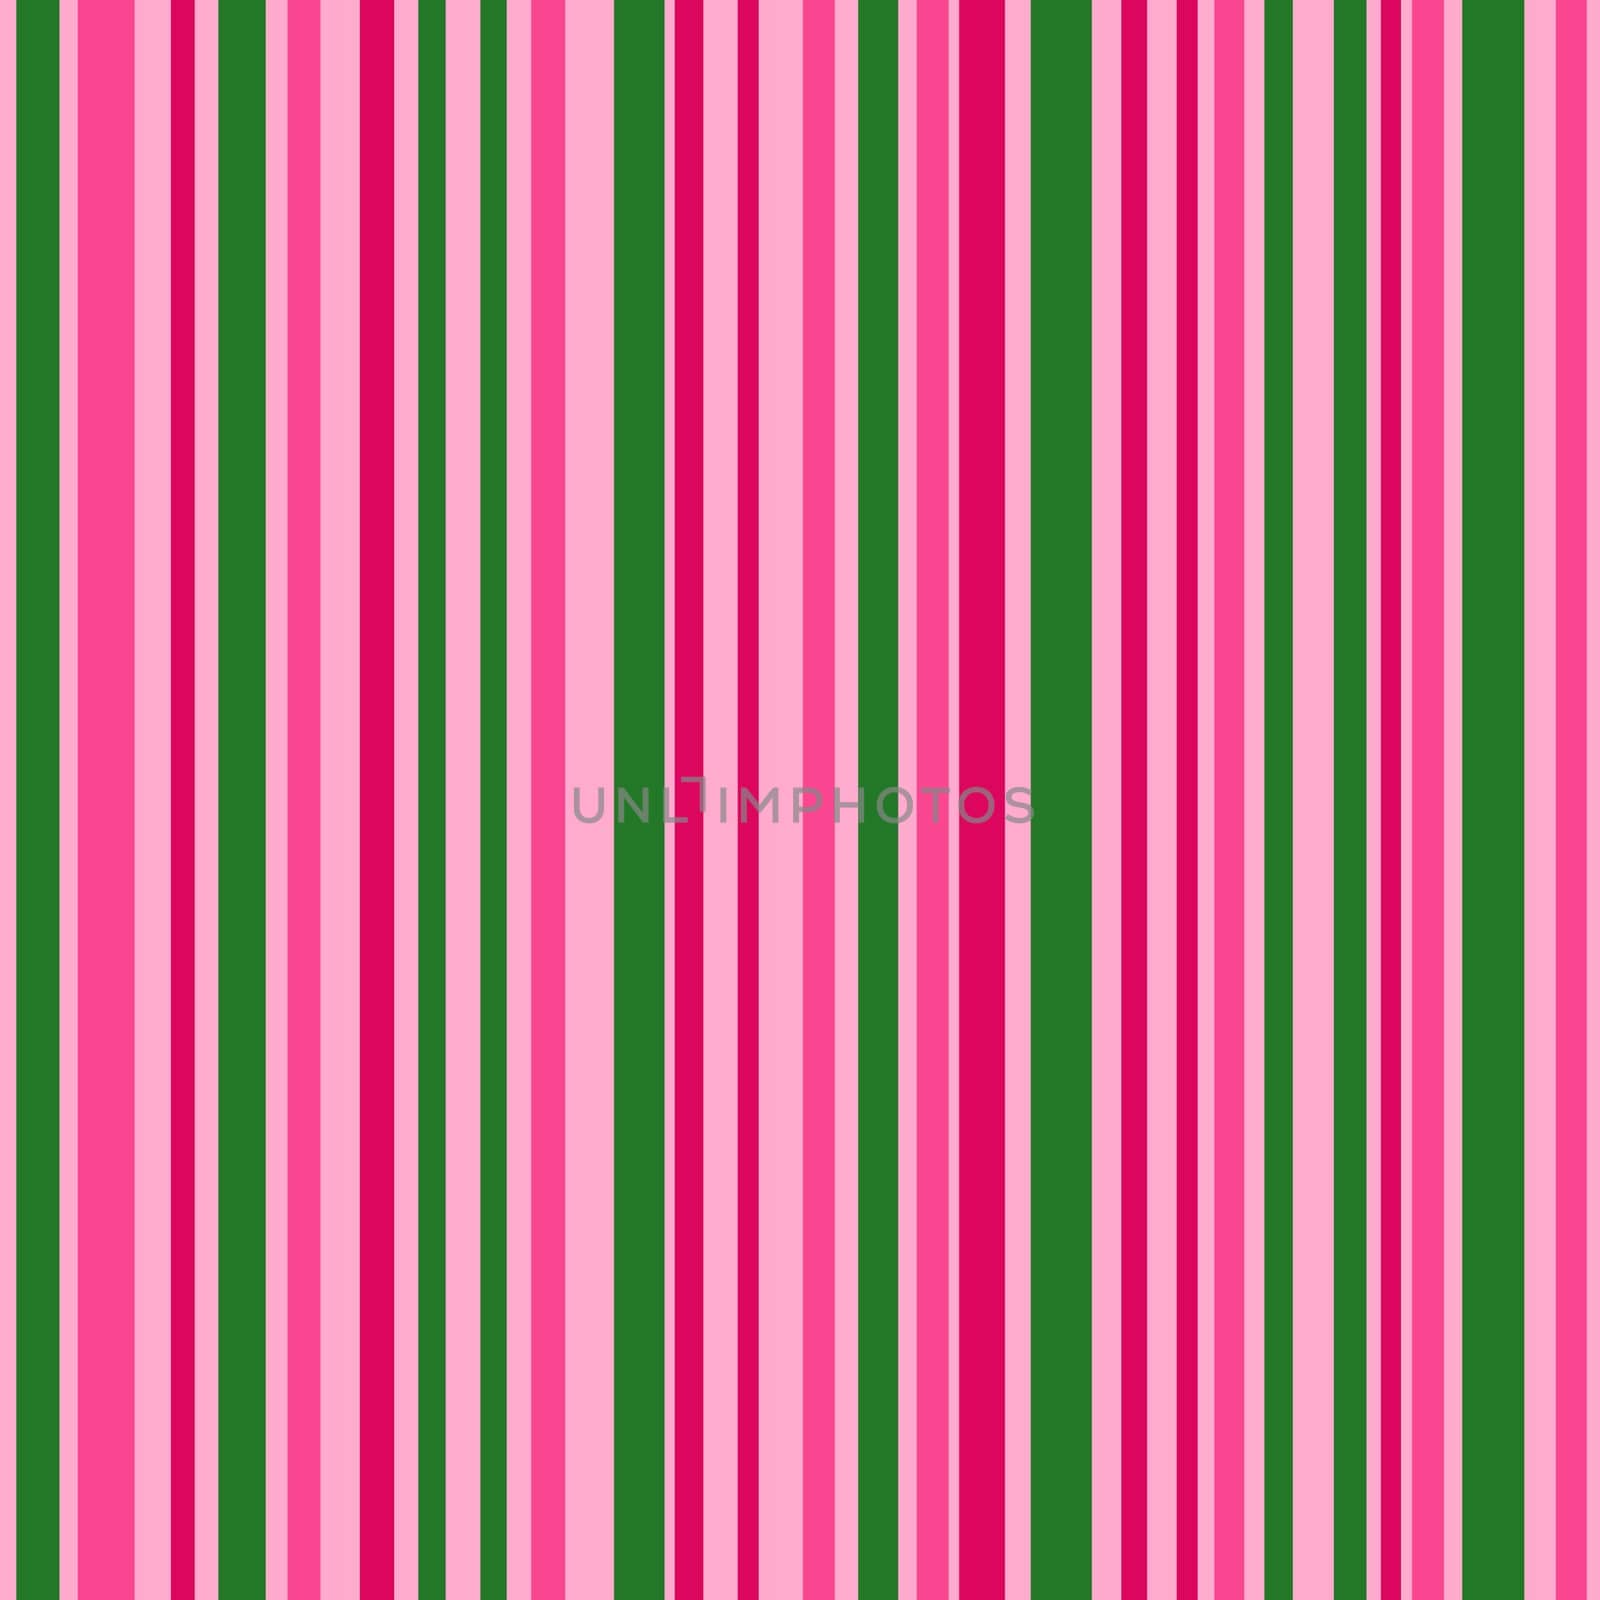 Hand drawn seamless pattern of vertical bright pink green stripes, summer vibrant striped background, modern trendy contemporary fabric print, saturated energetic colors, rainbow design dopamin